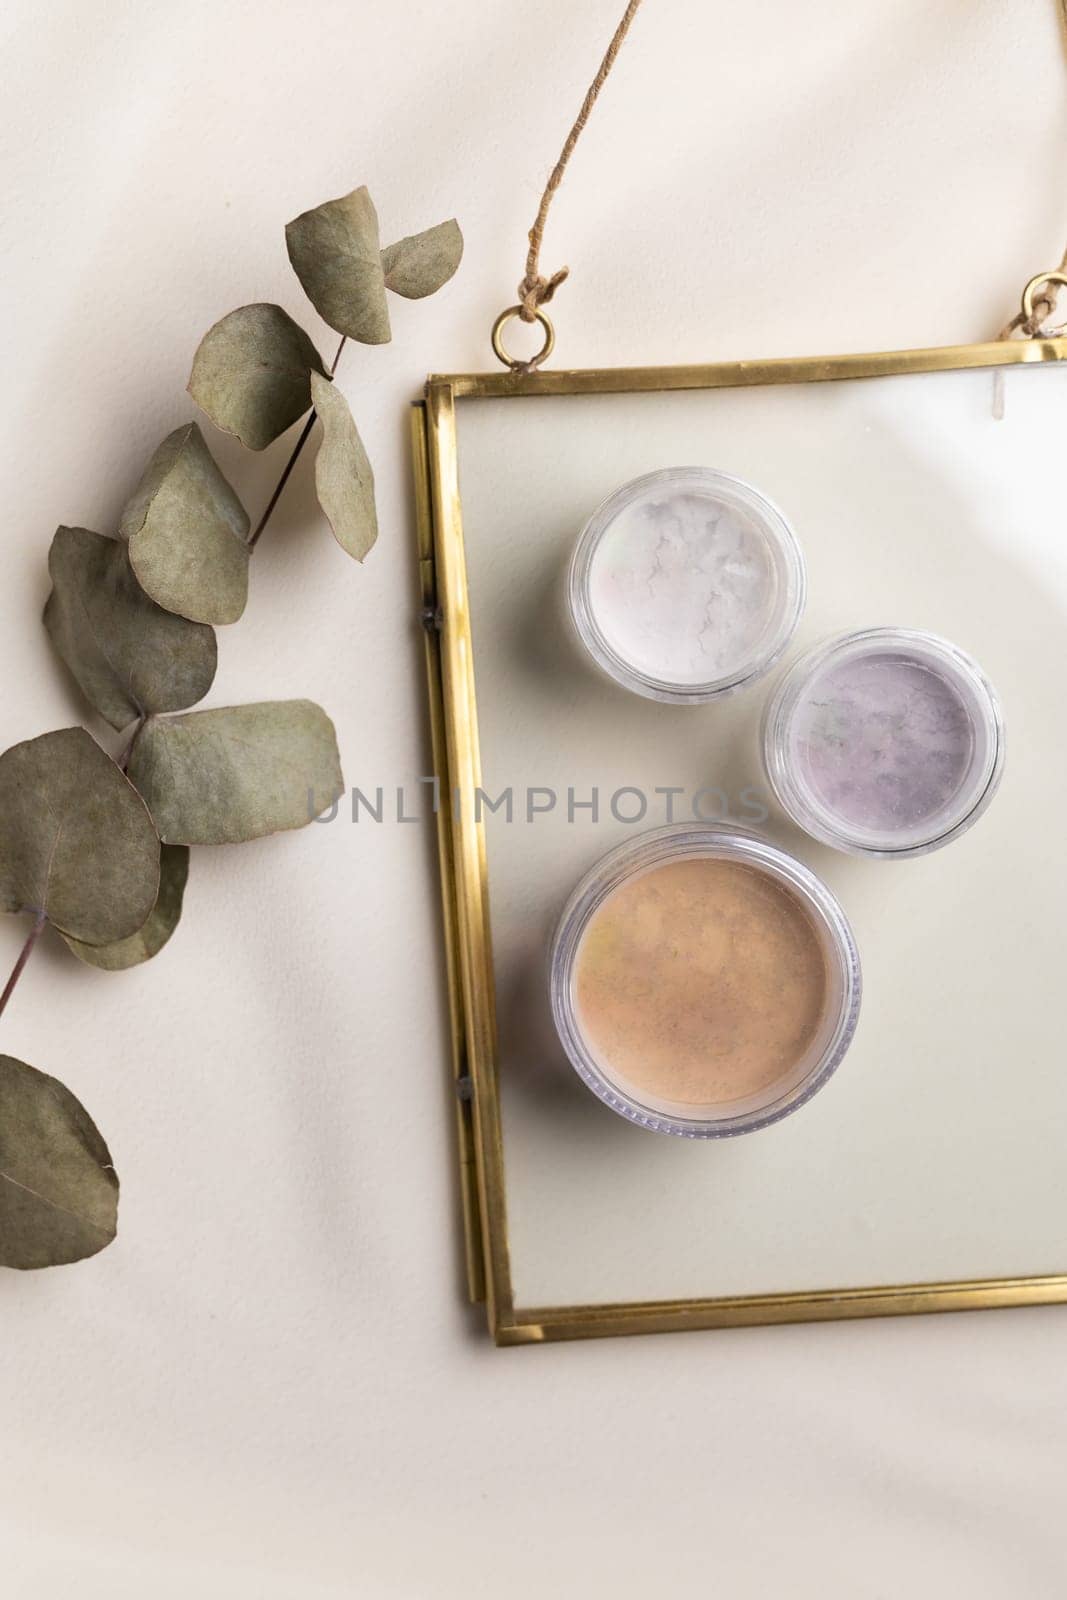 Top view eye shadow and facial powder on natural background with dried flowers. Aesthetics of makeup artist, make-up for yourself and beauty salon by Satura86